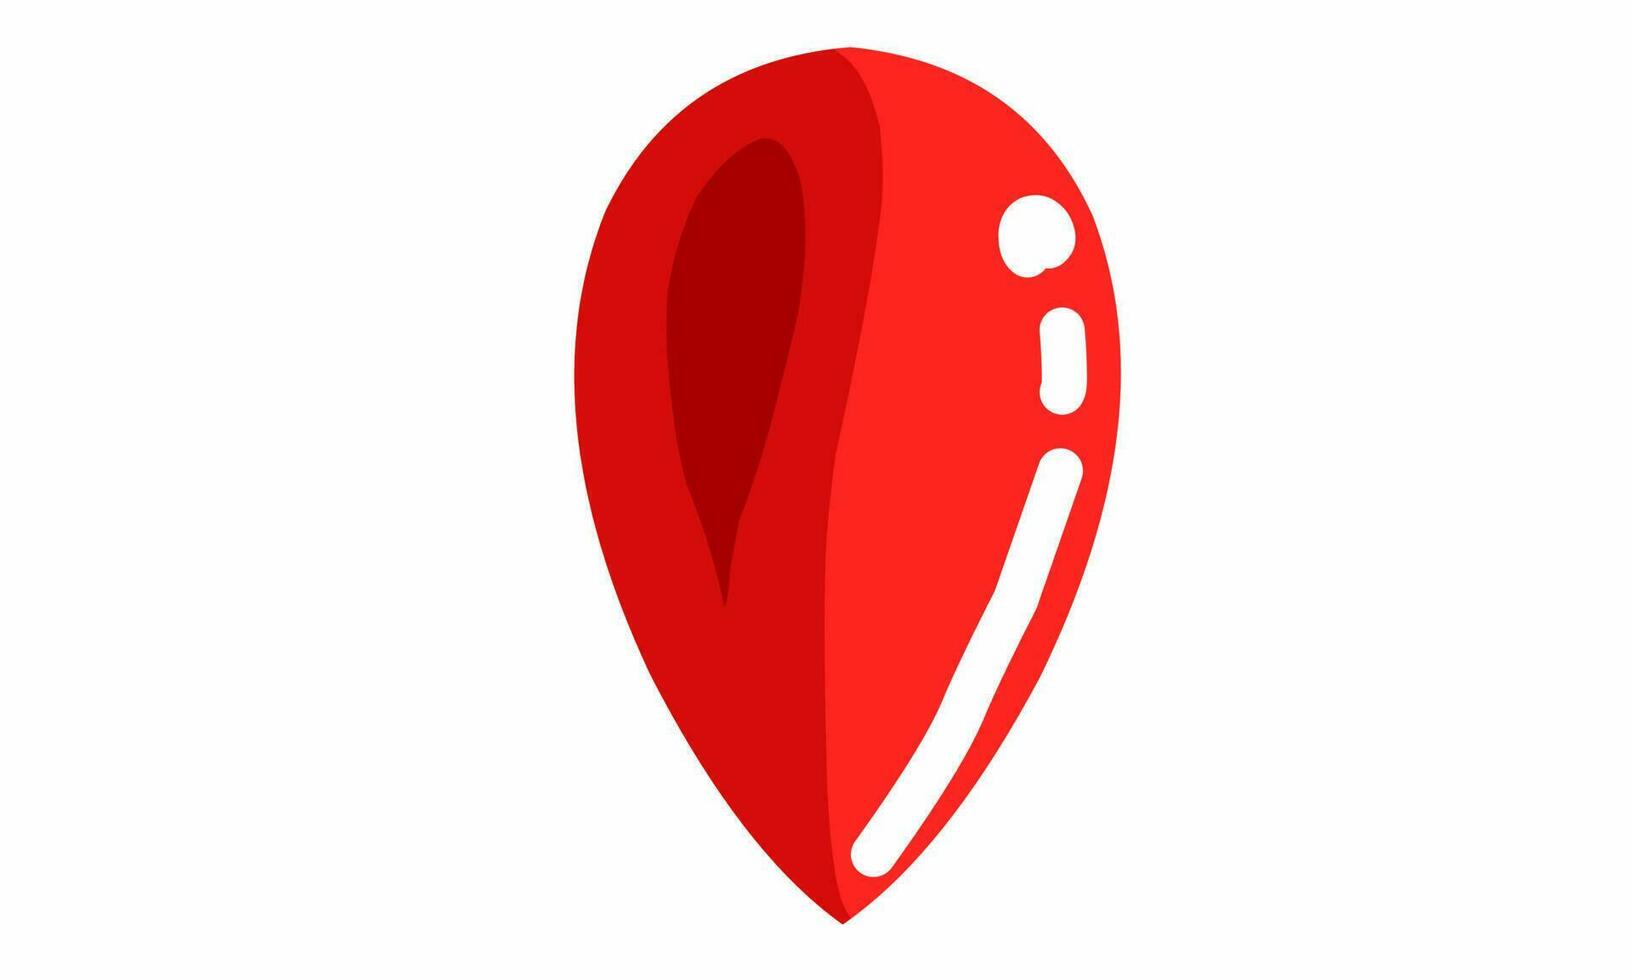 Point mark or symbol. Mark the destination on the map application. With 3d shape. Coloured Red. vector